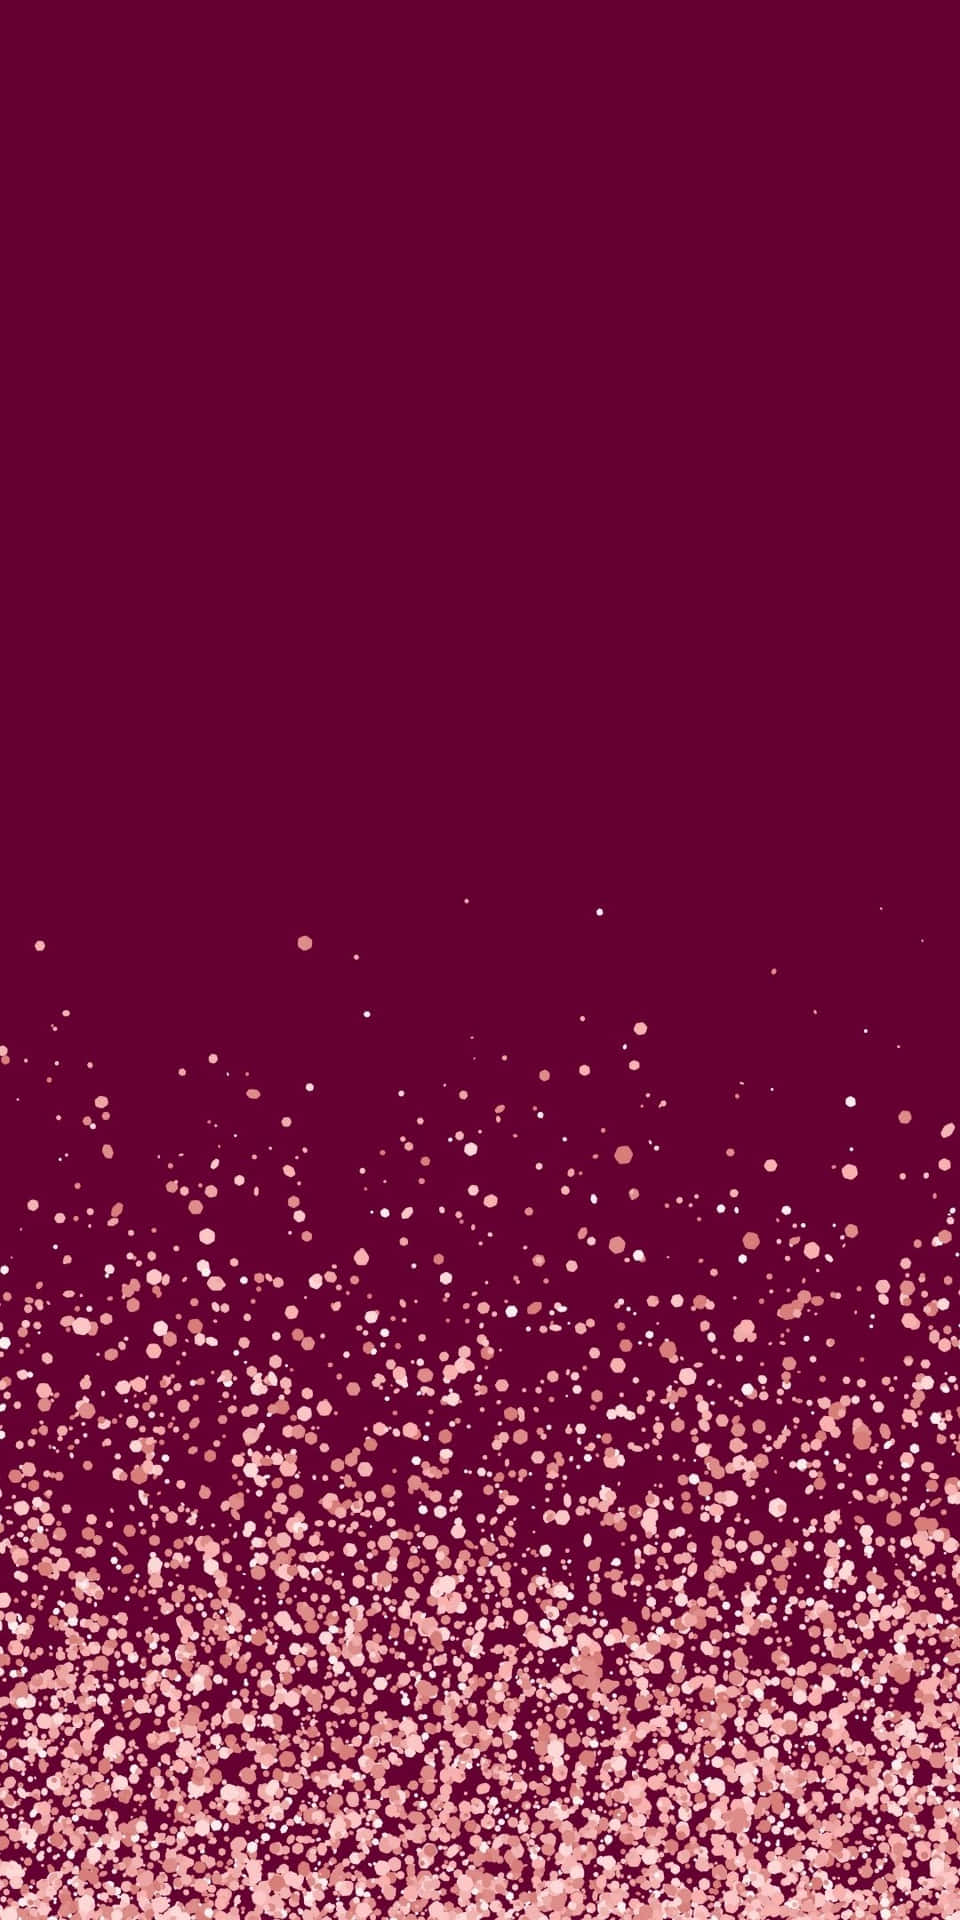 Maroon With Sparkly Pink Glitter Background